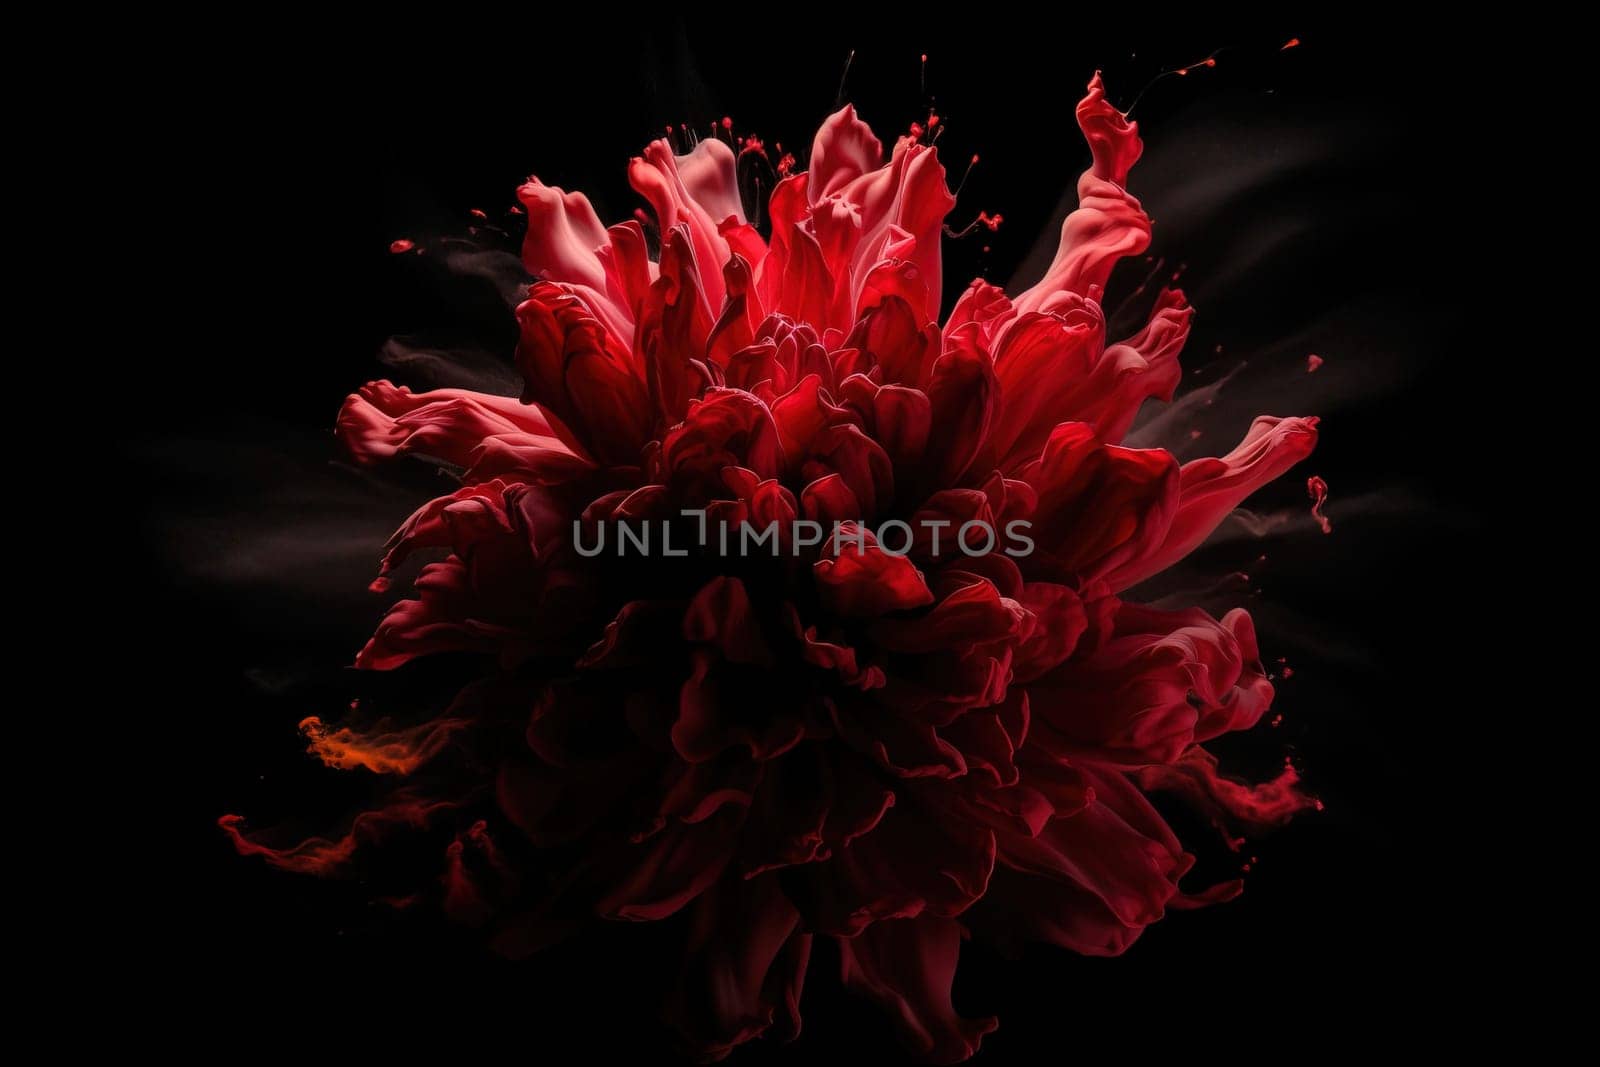 blew up of splashes of paint explosion in dark red color by tan4ikk1